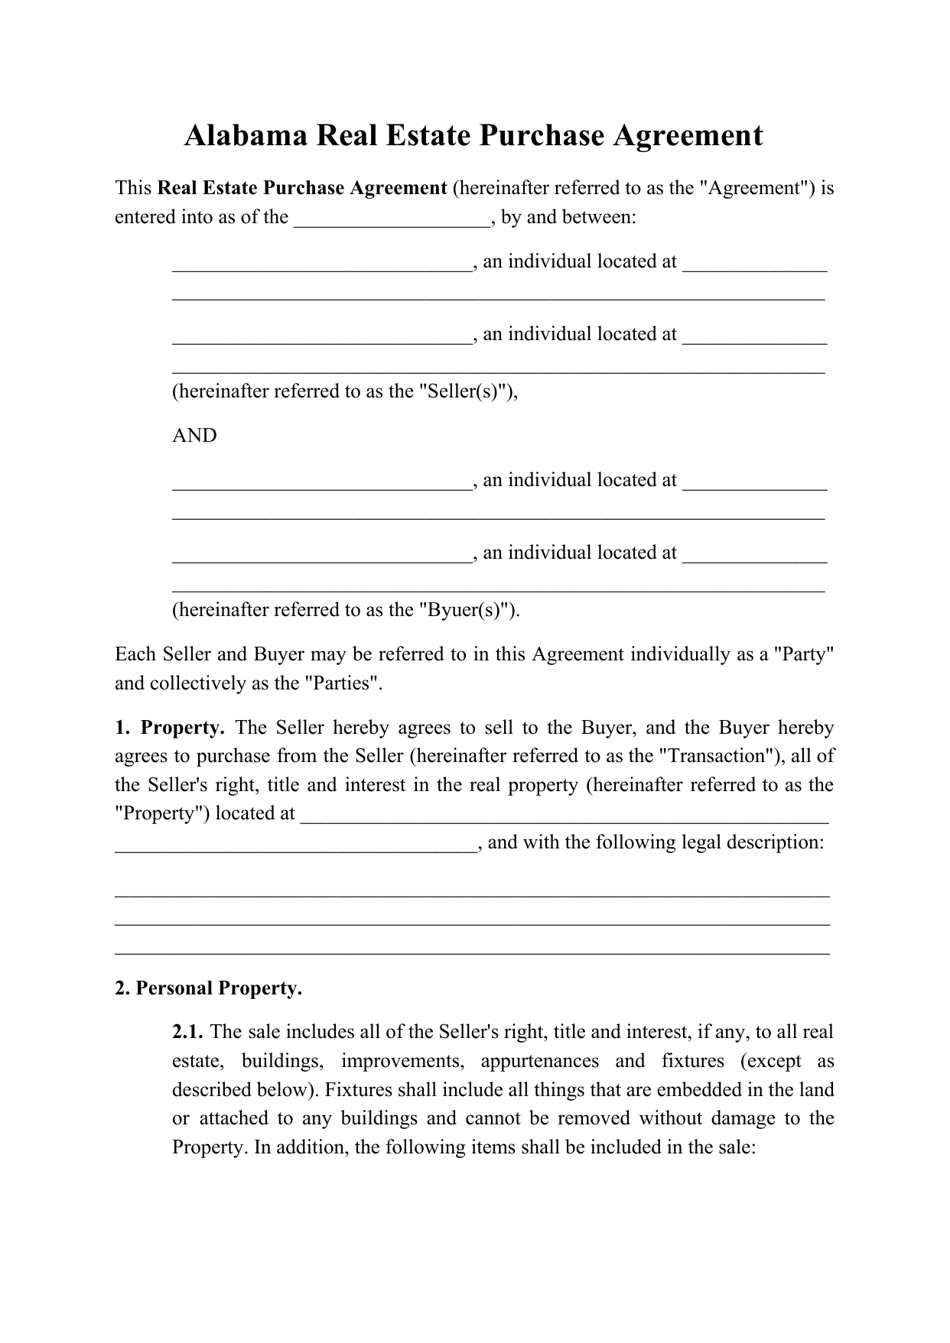 Real Estate Purchase Agreement Template - Alabama, Page 1